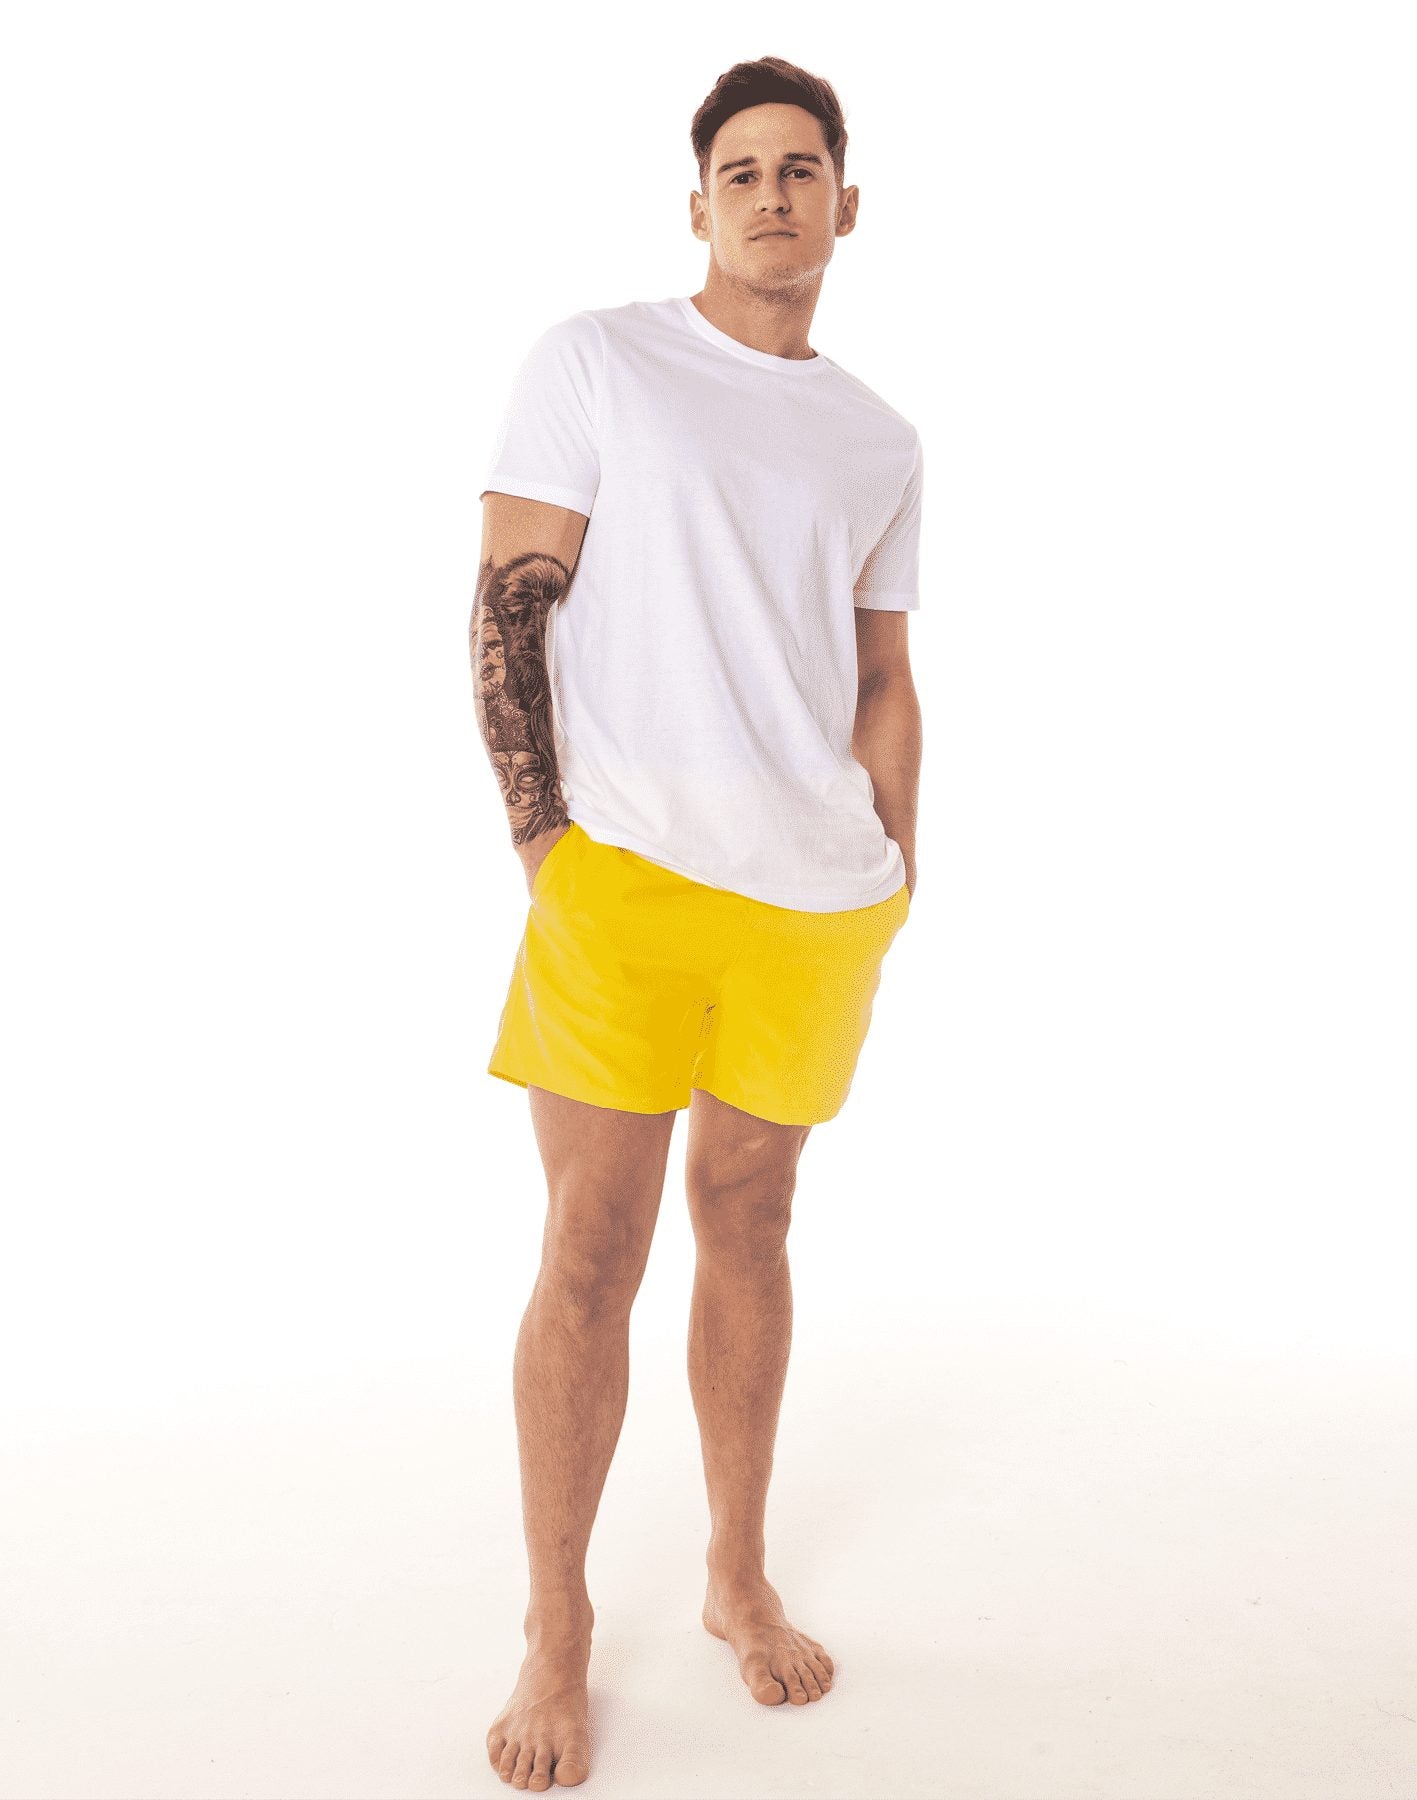 SevenC's Mens' Recycled Polyester Shorts in Yellow - Front View on Model